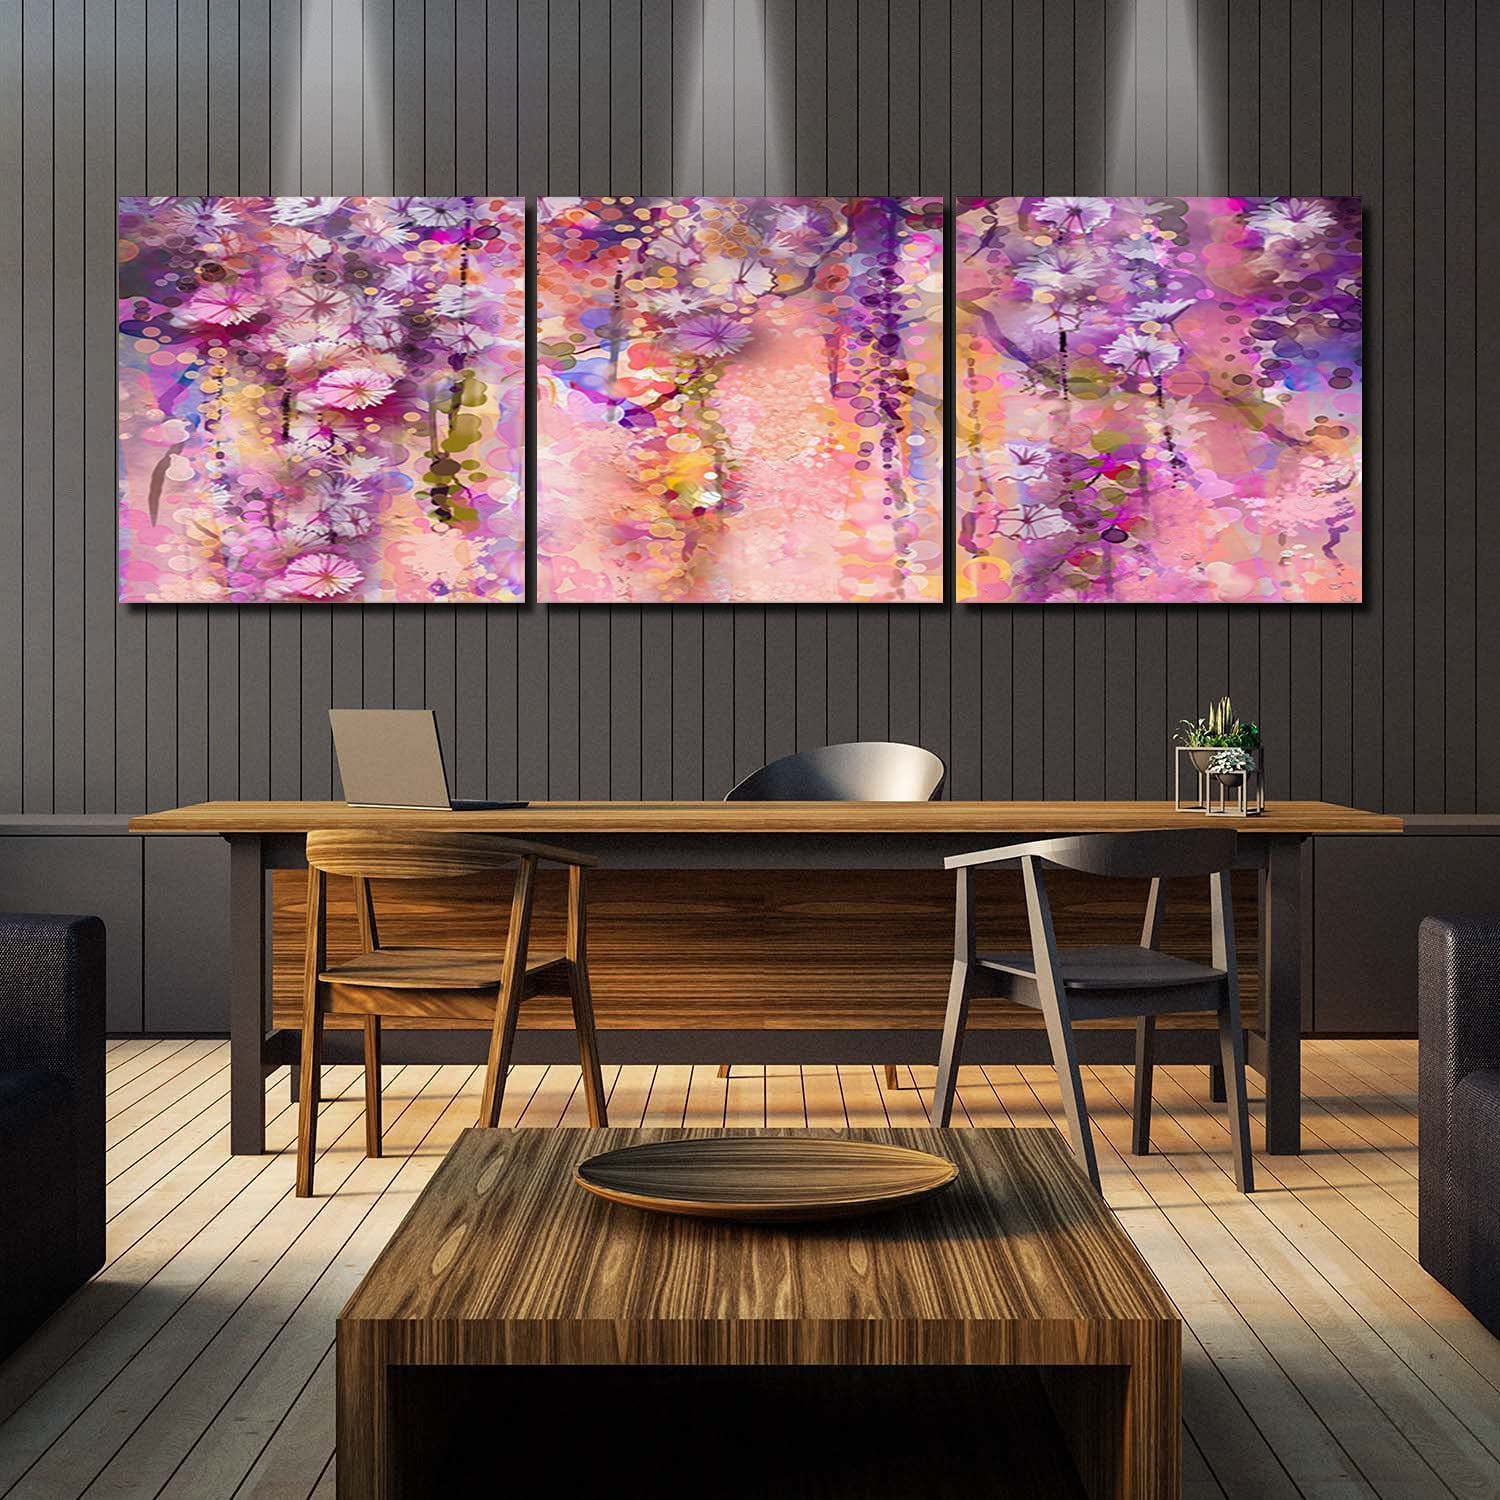 Purple Queen Flower Stretched Canvas Print Framed Wall Art Home Decor Painting 